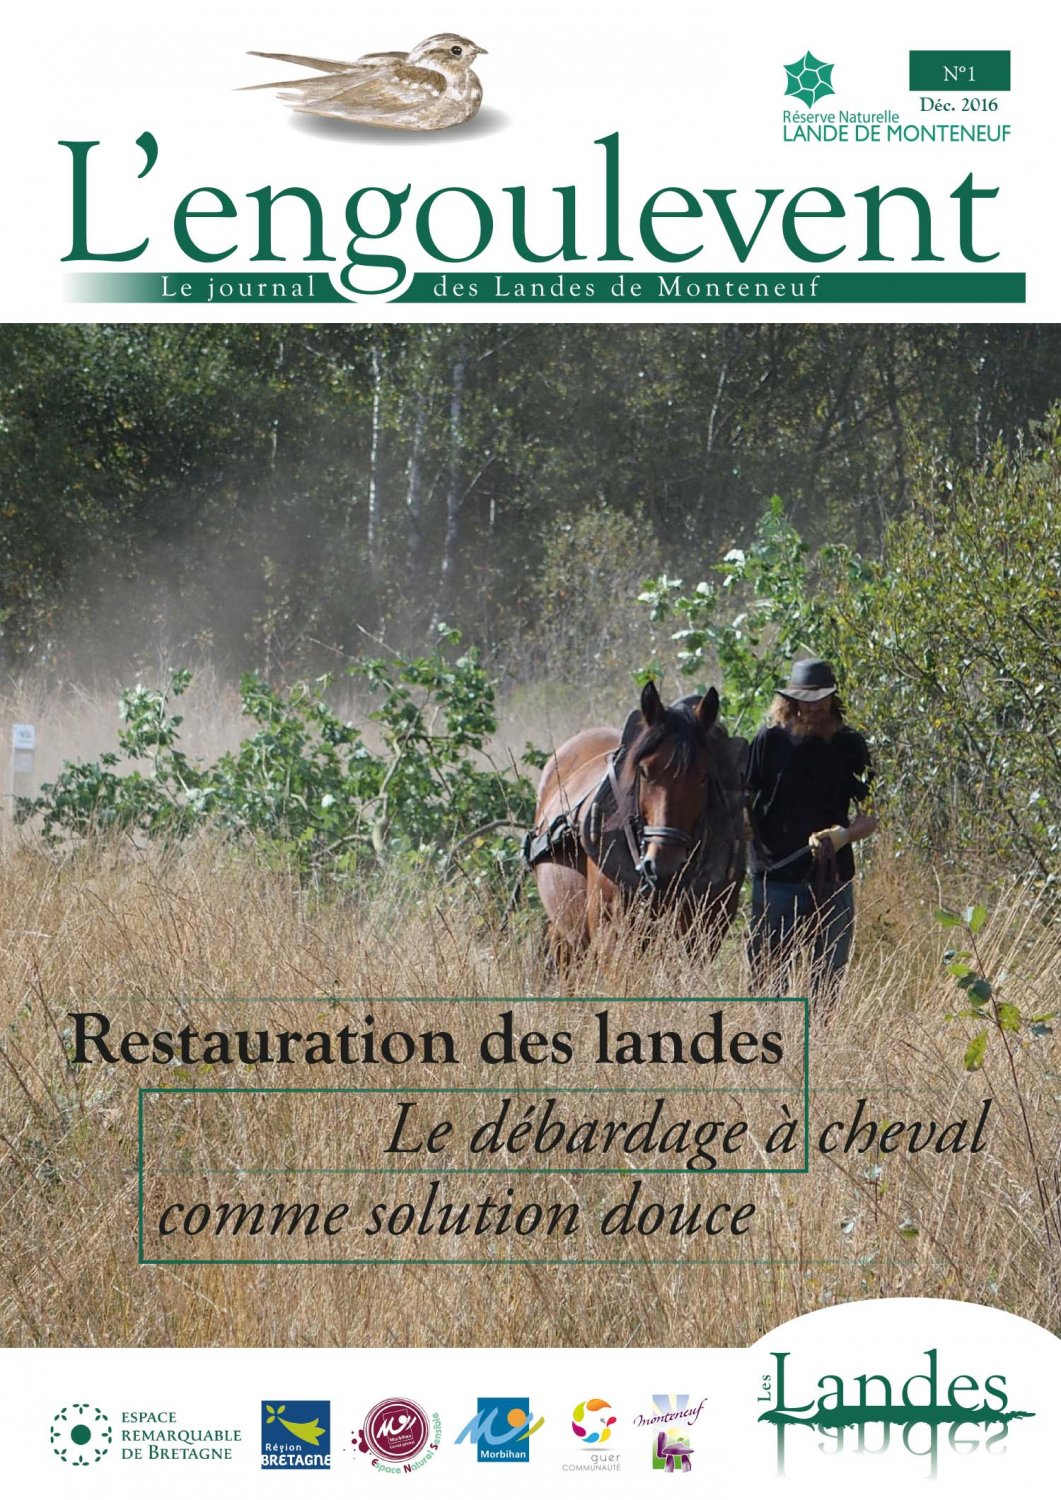 L'engoulevent N°1